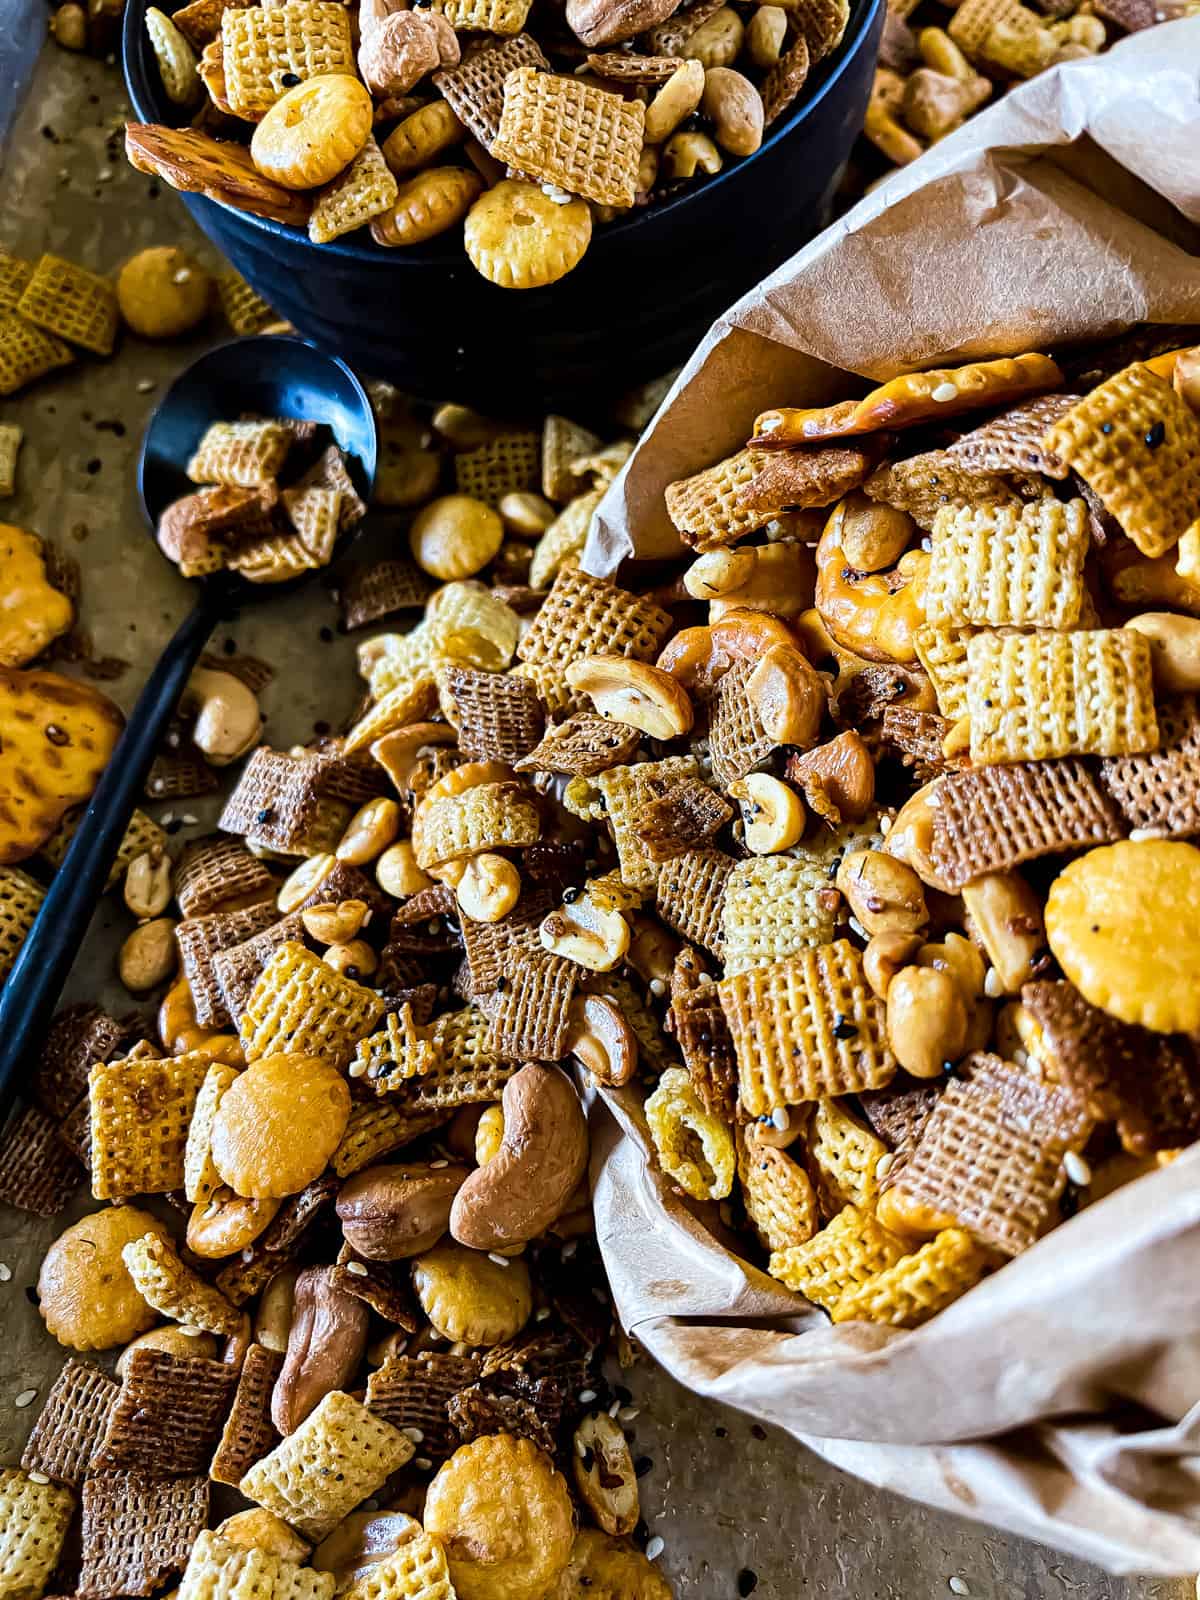 up close picture of a bag of snack mix with pretzels, cereal, nuts, and oyster crackers